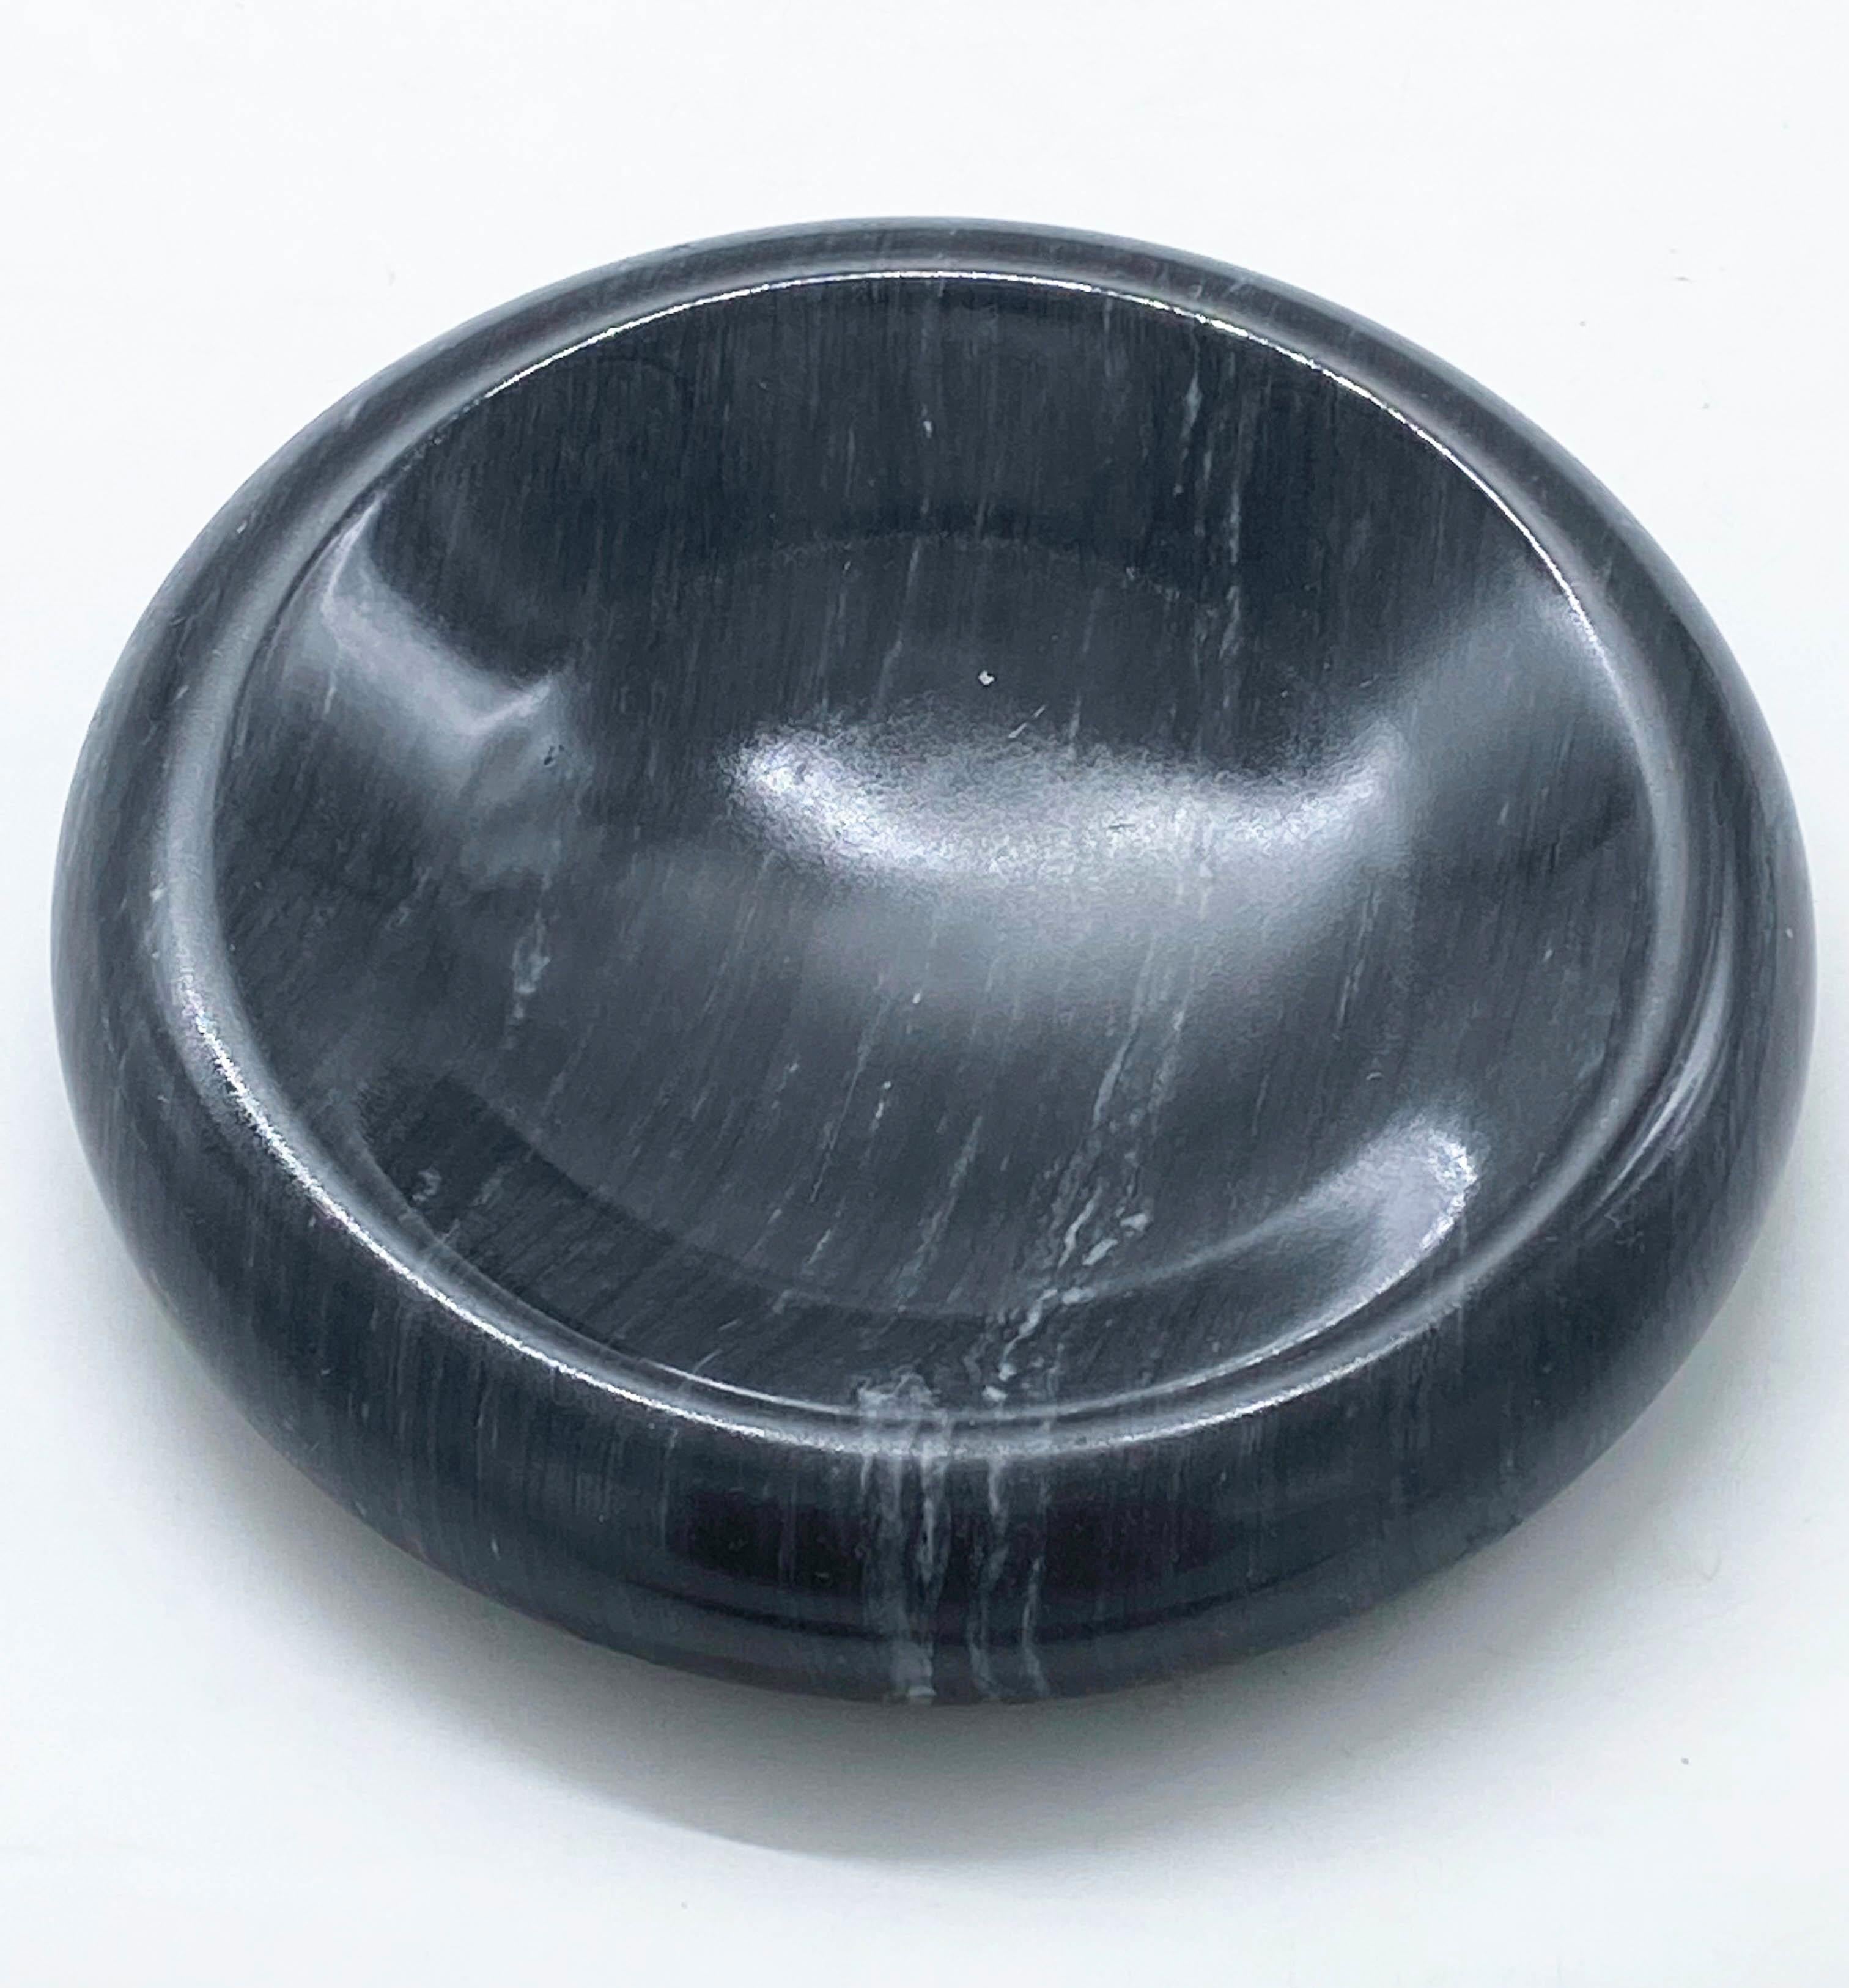 Round tray or centrepiece in Marquina Black Marble with various shades and veining, handmade by Italian craftsmen specialised in marble processing. In the style of UP & UP 1970.